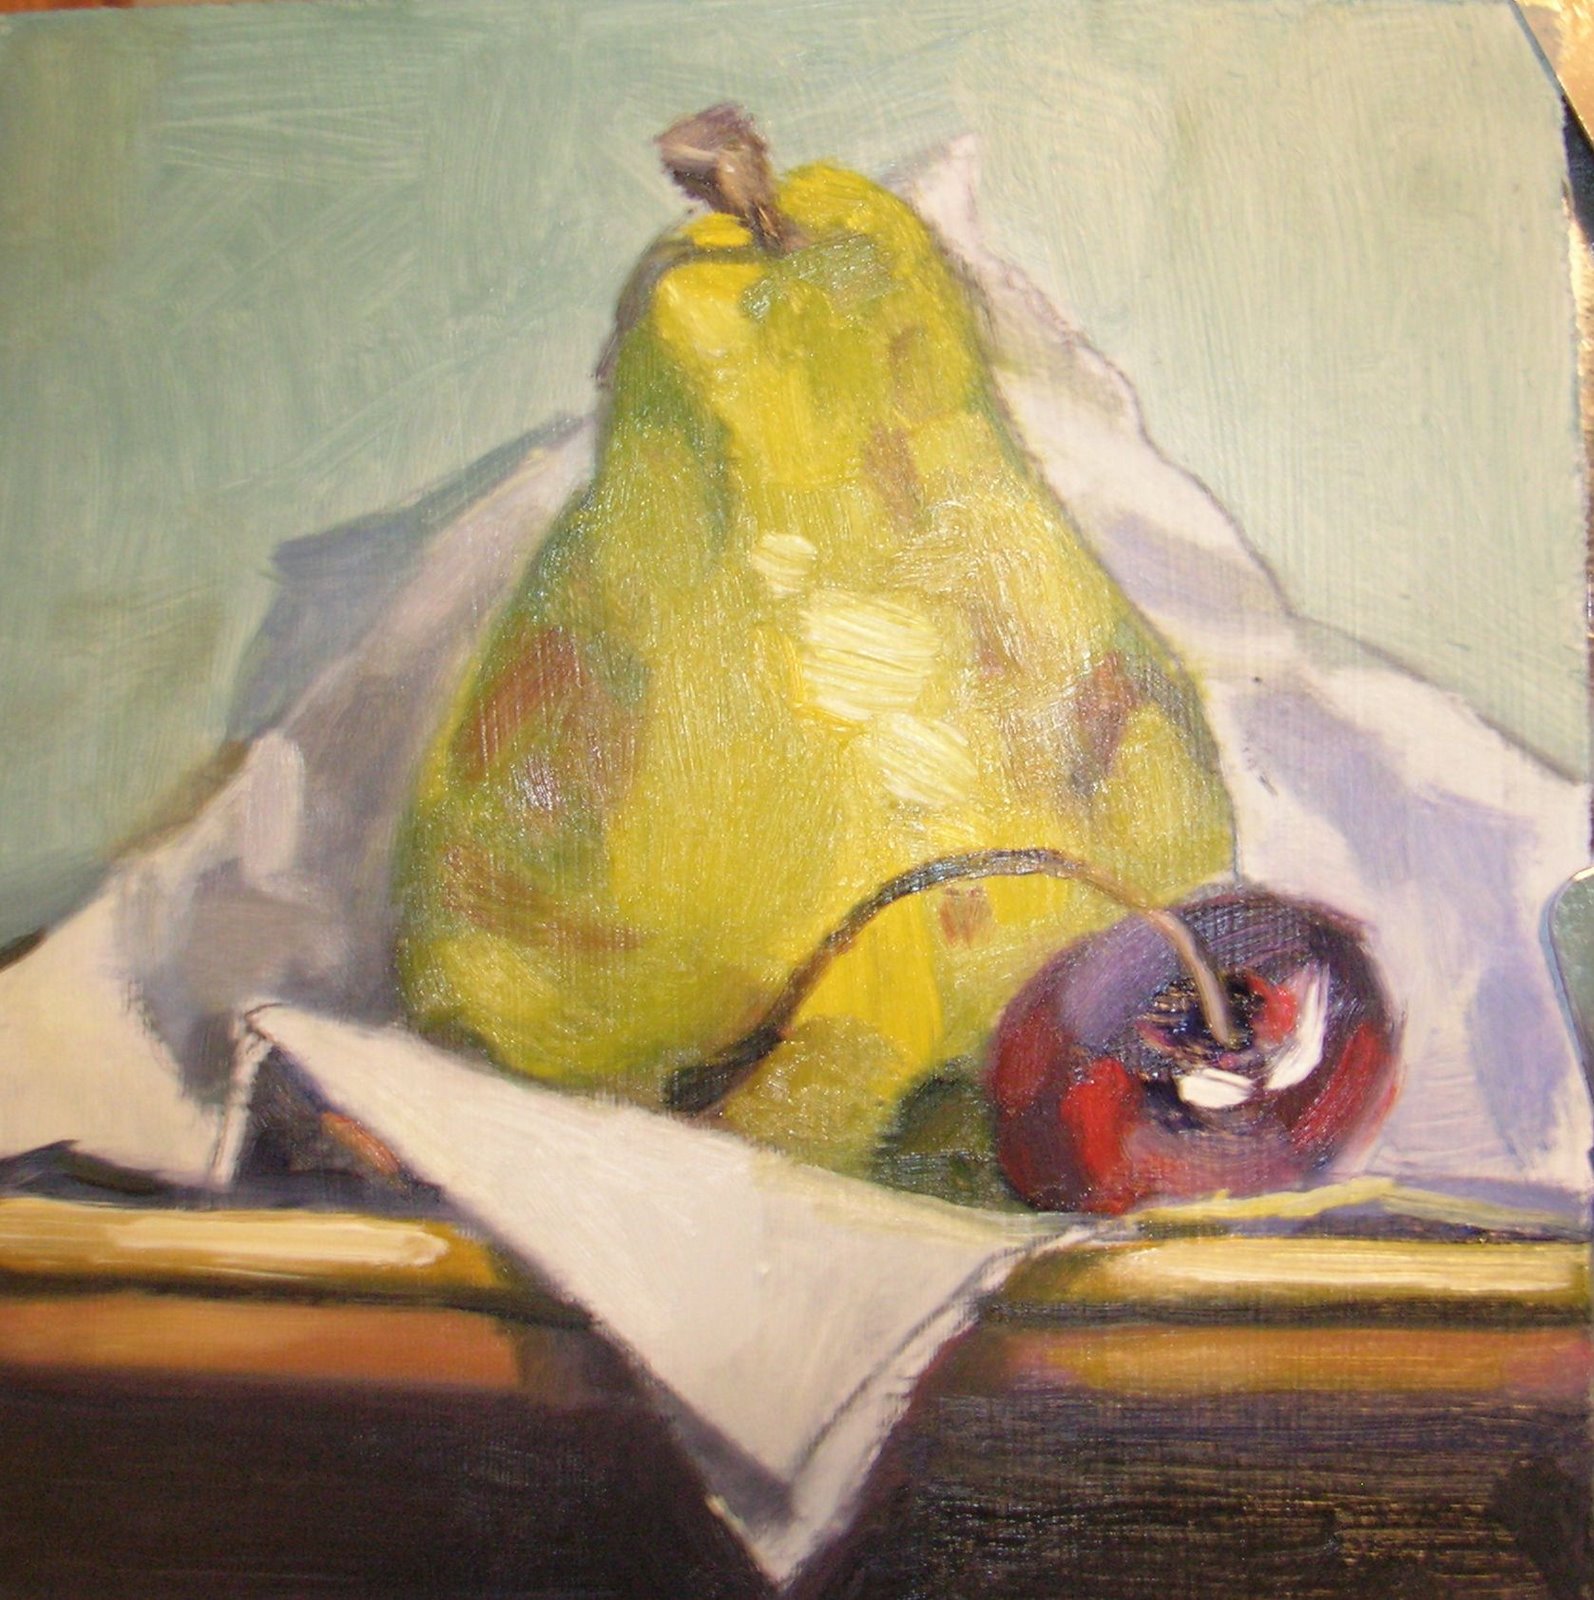 [john's+pear+and+cherry+for+posting+july+08.jpg]